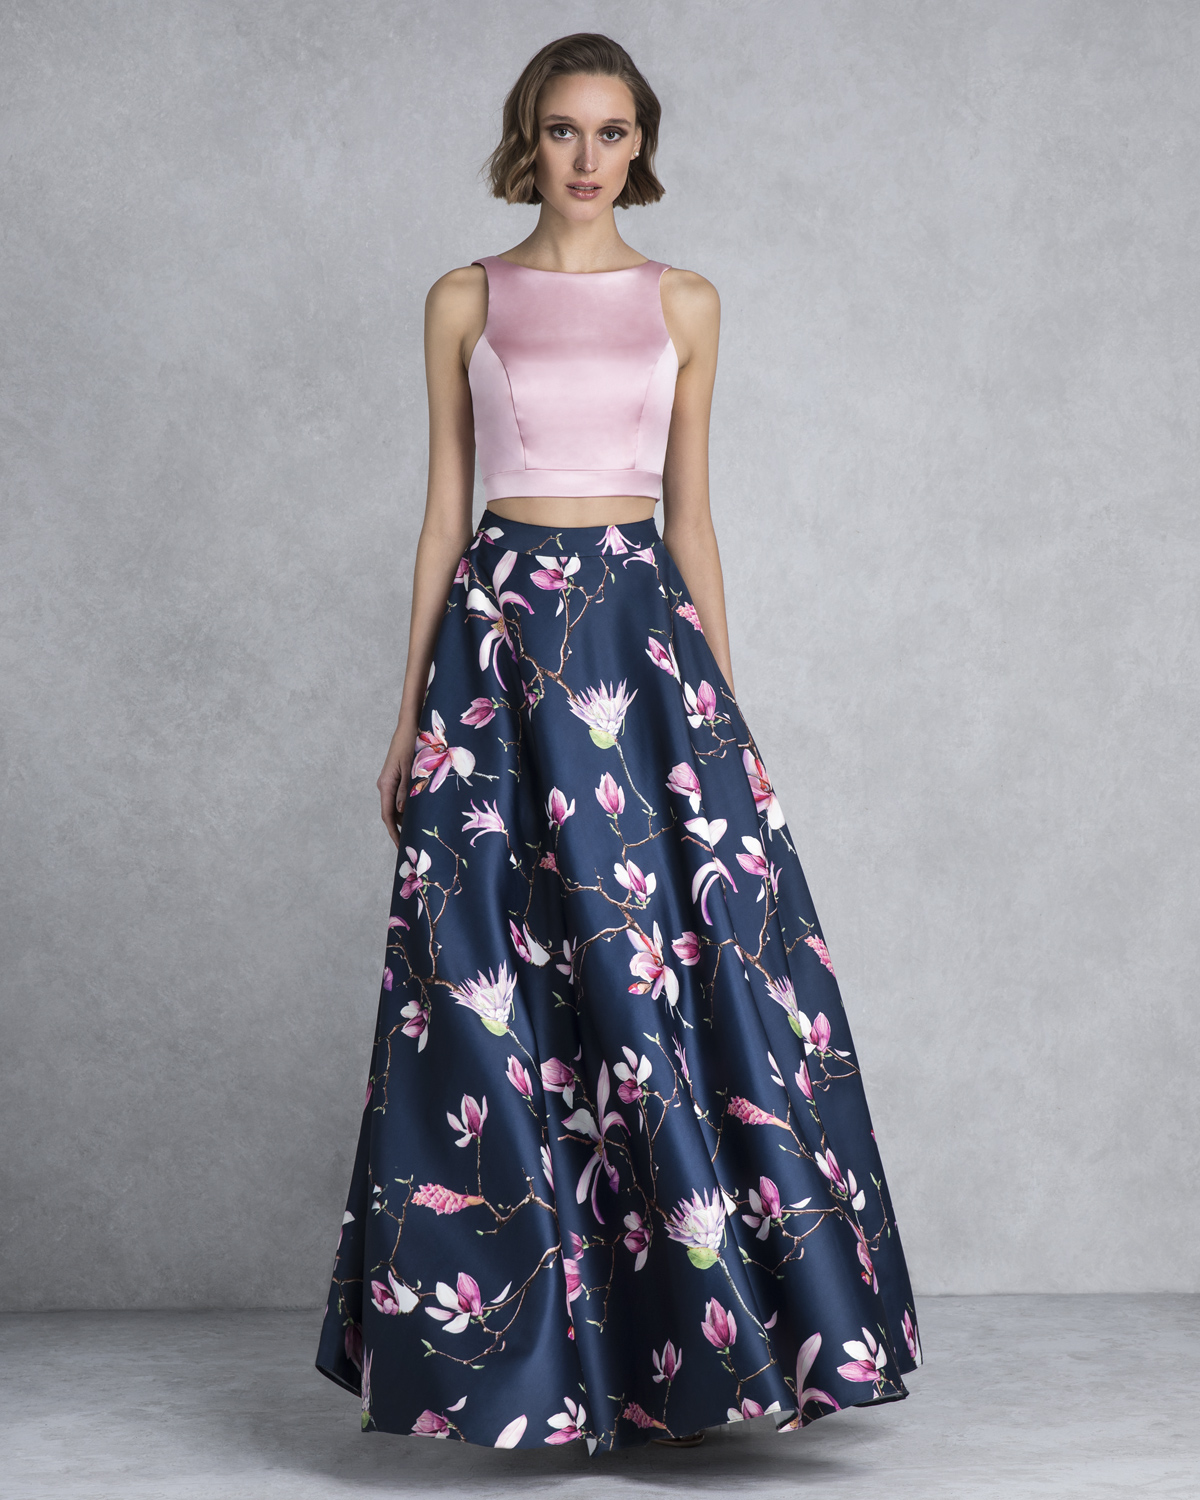 Cocktail Dresses / Long floral skirt with printed or solid color top